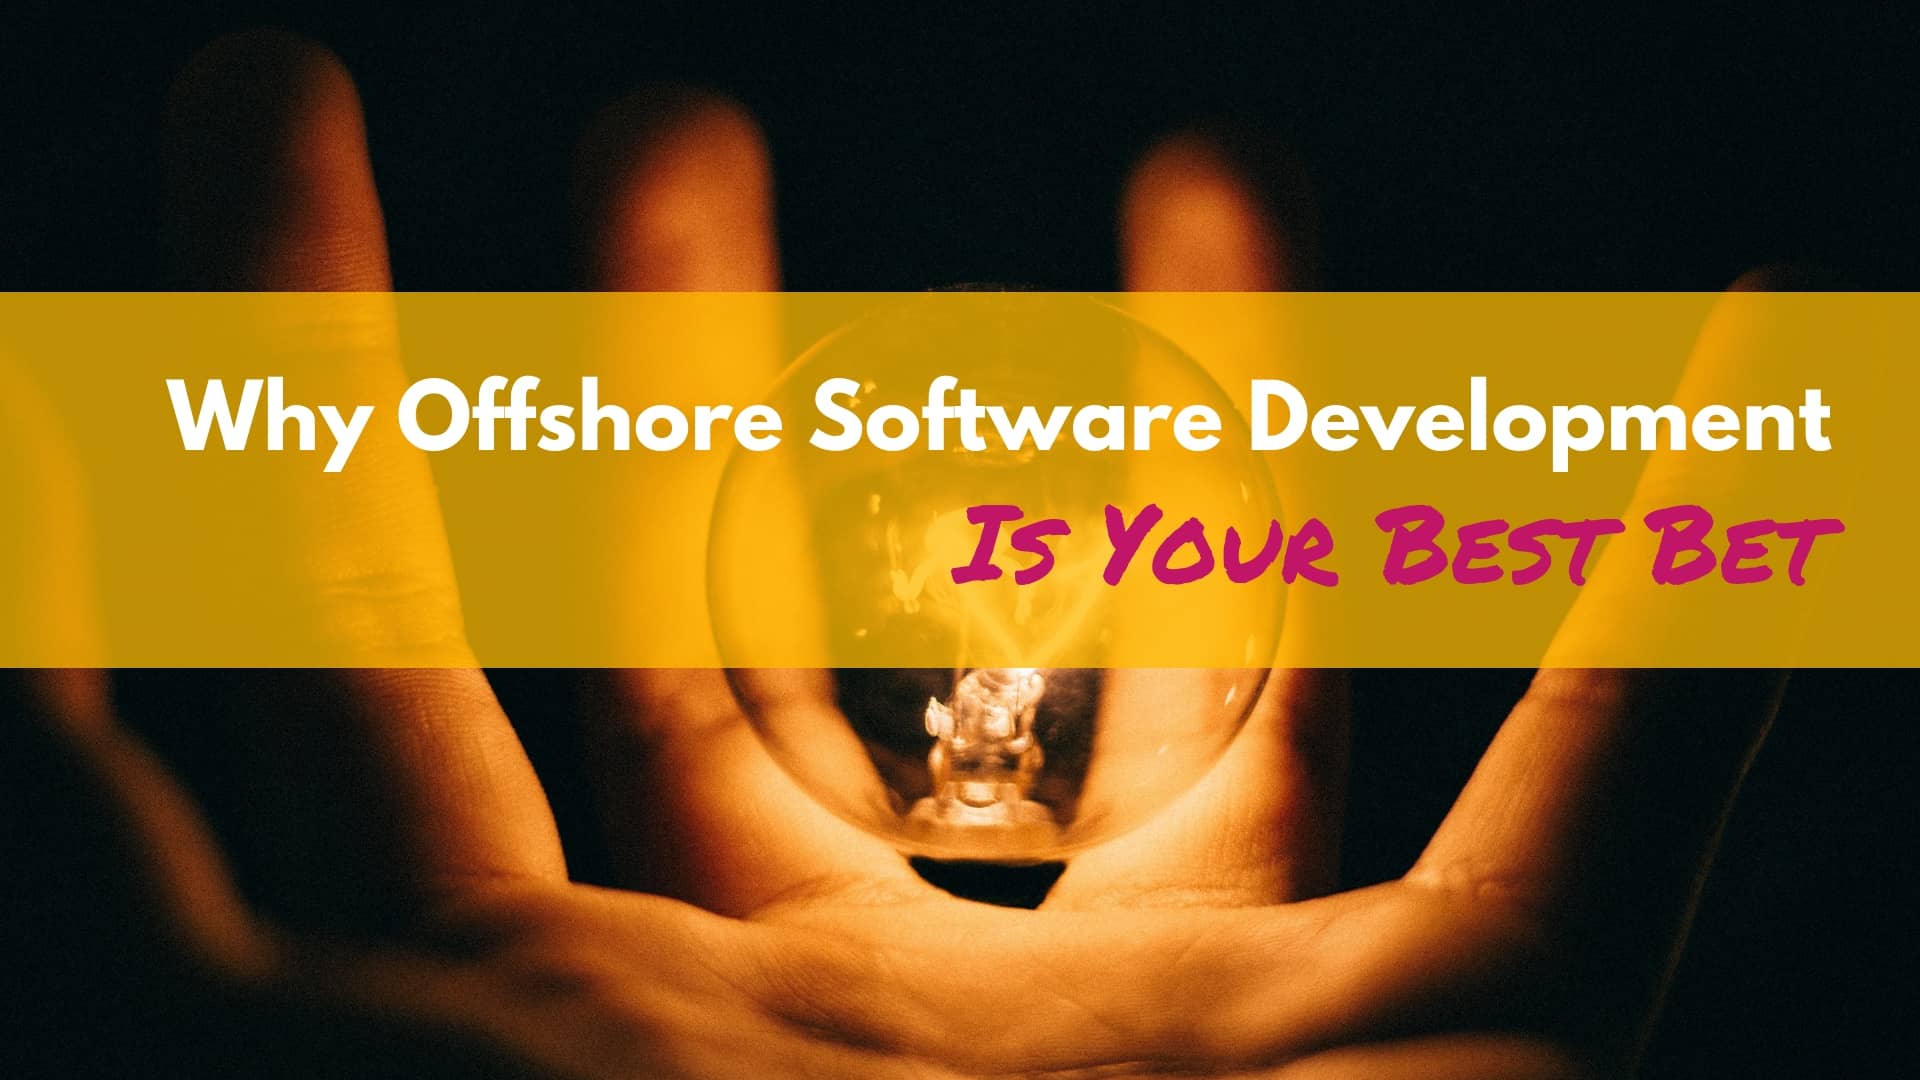 Why Offshore Software Development Is Your Best Bet?